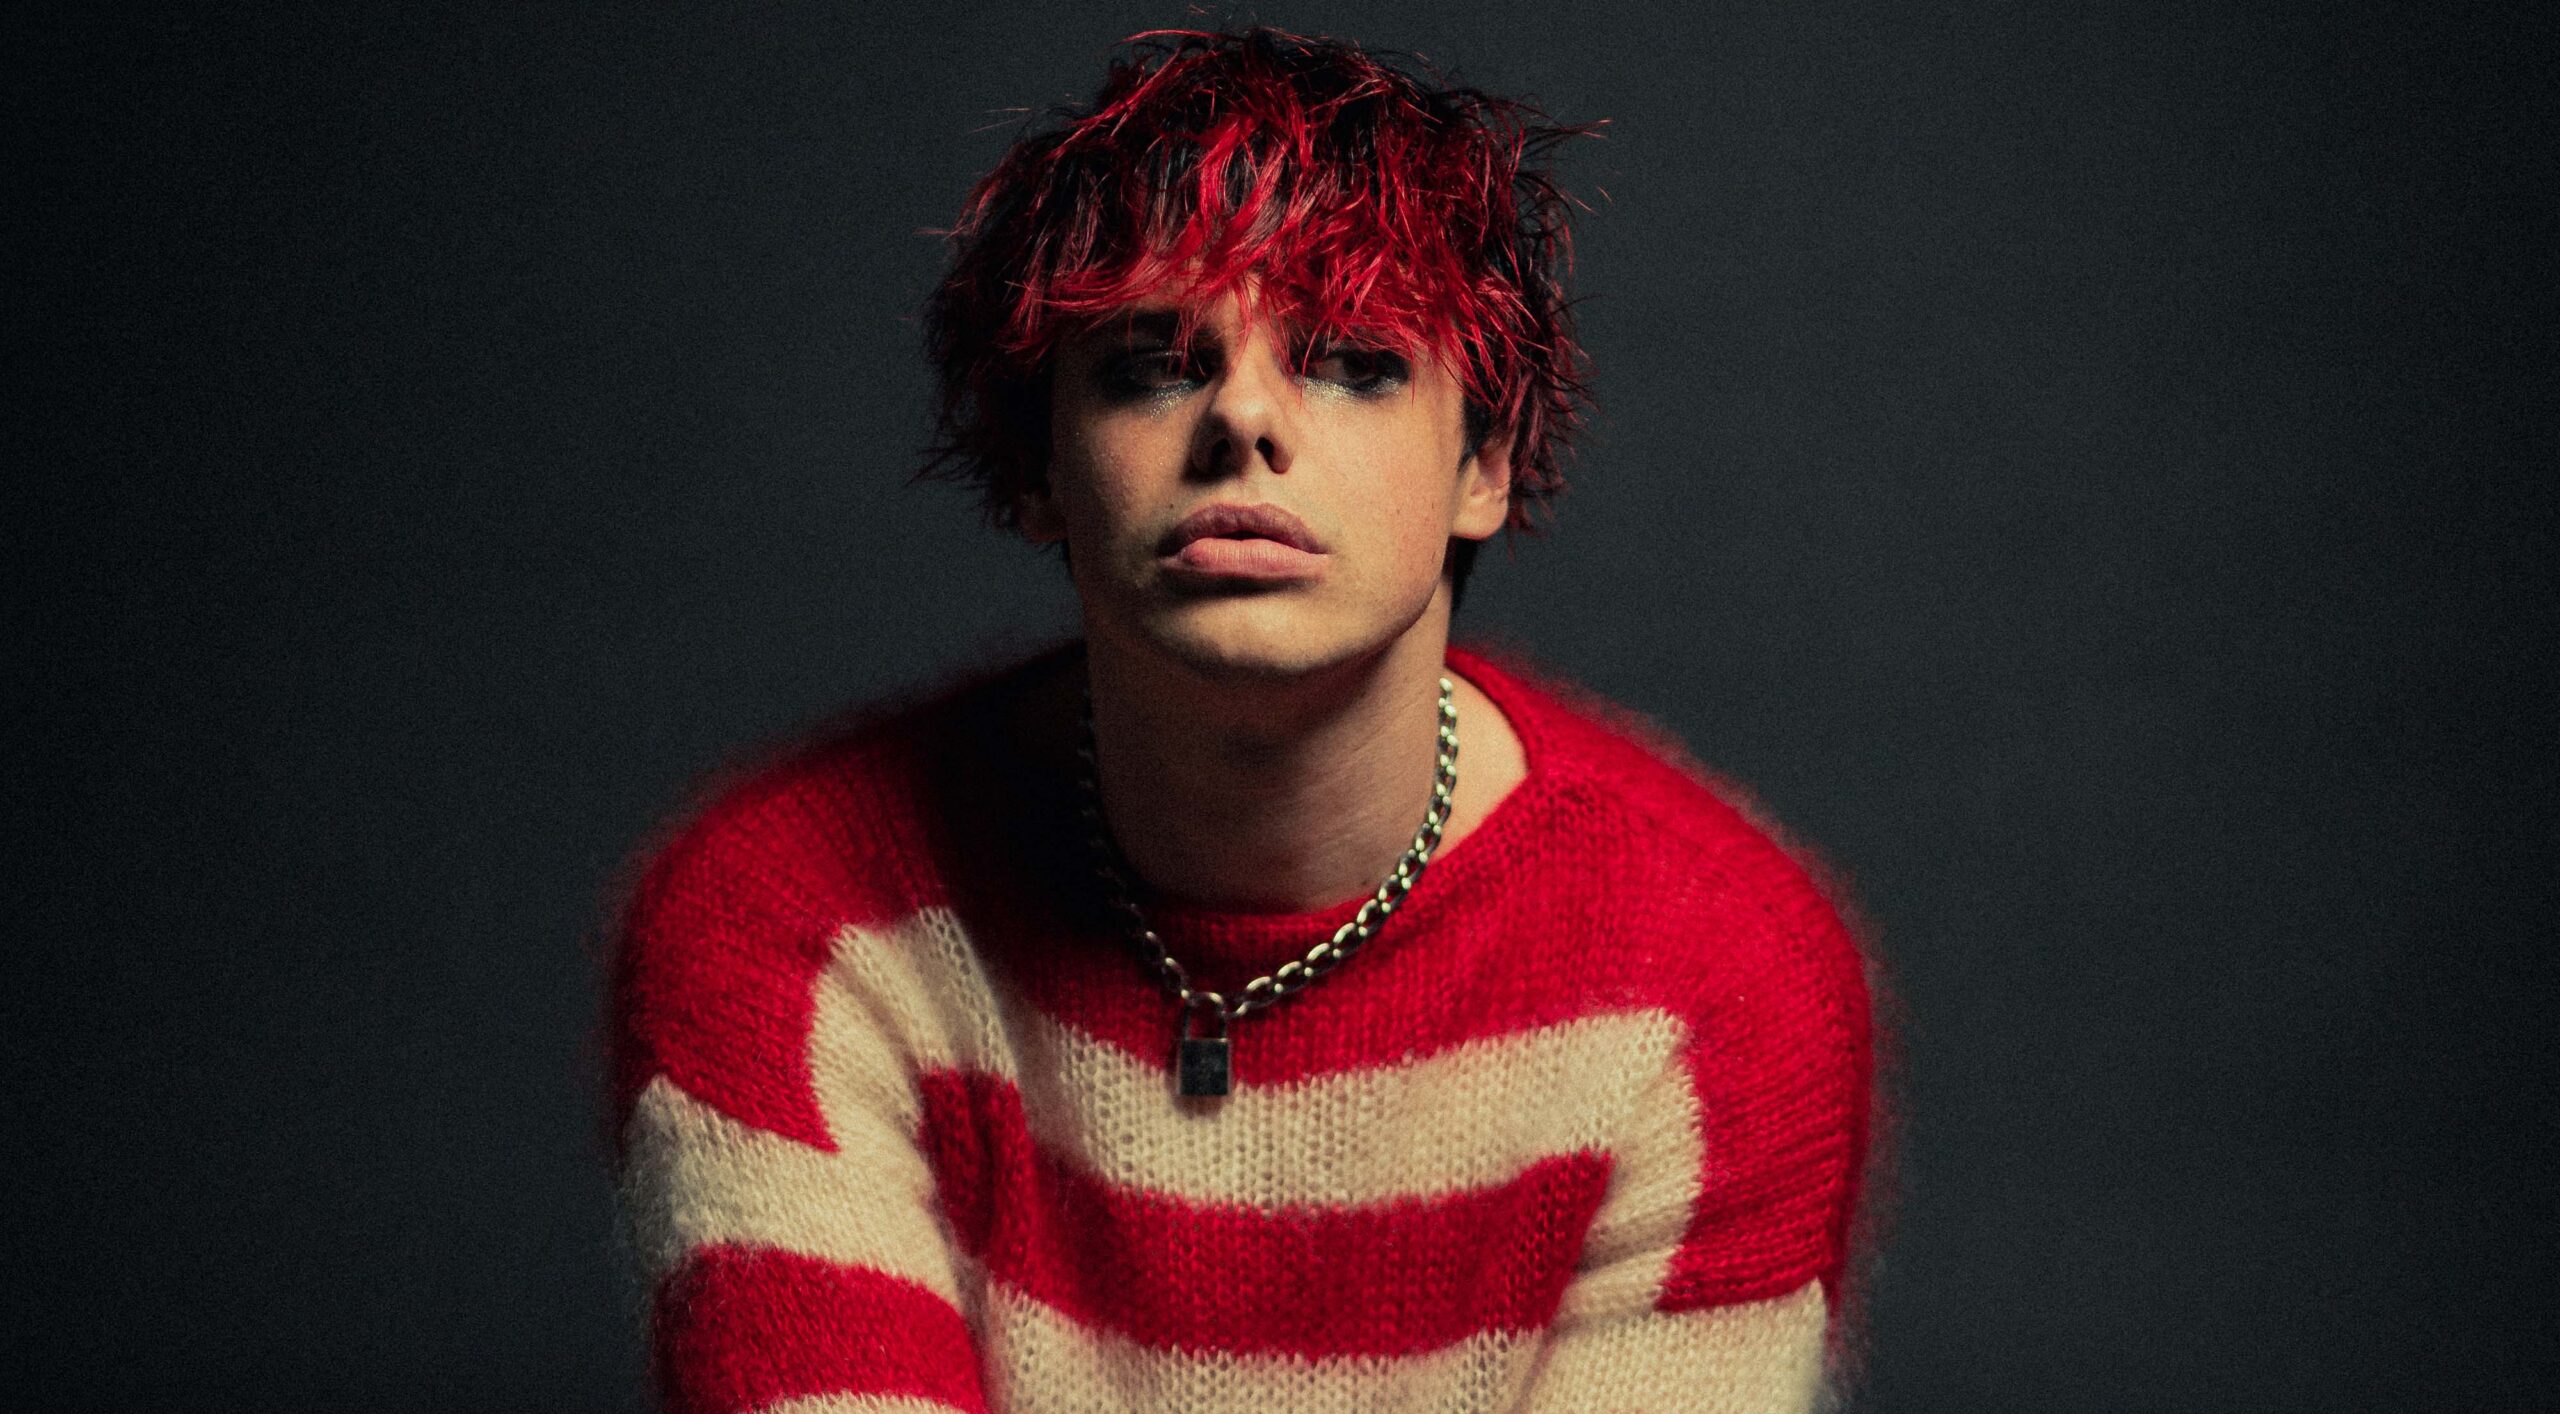 Yungblud ‘weird!’ review boring pop dressed up in better politics